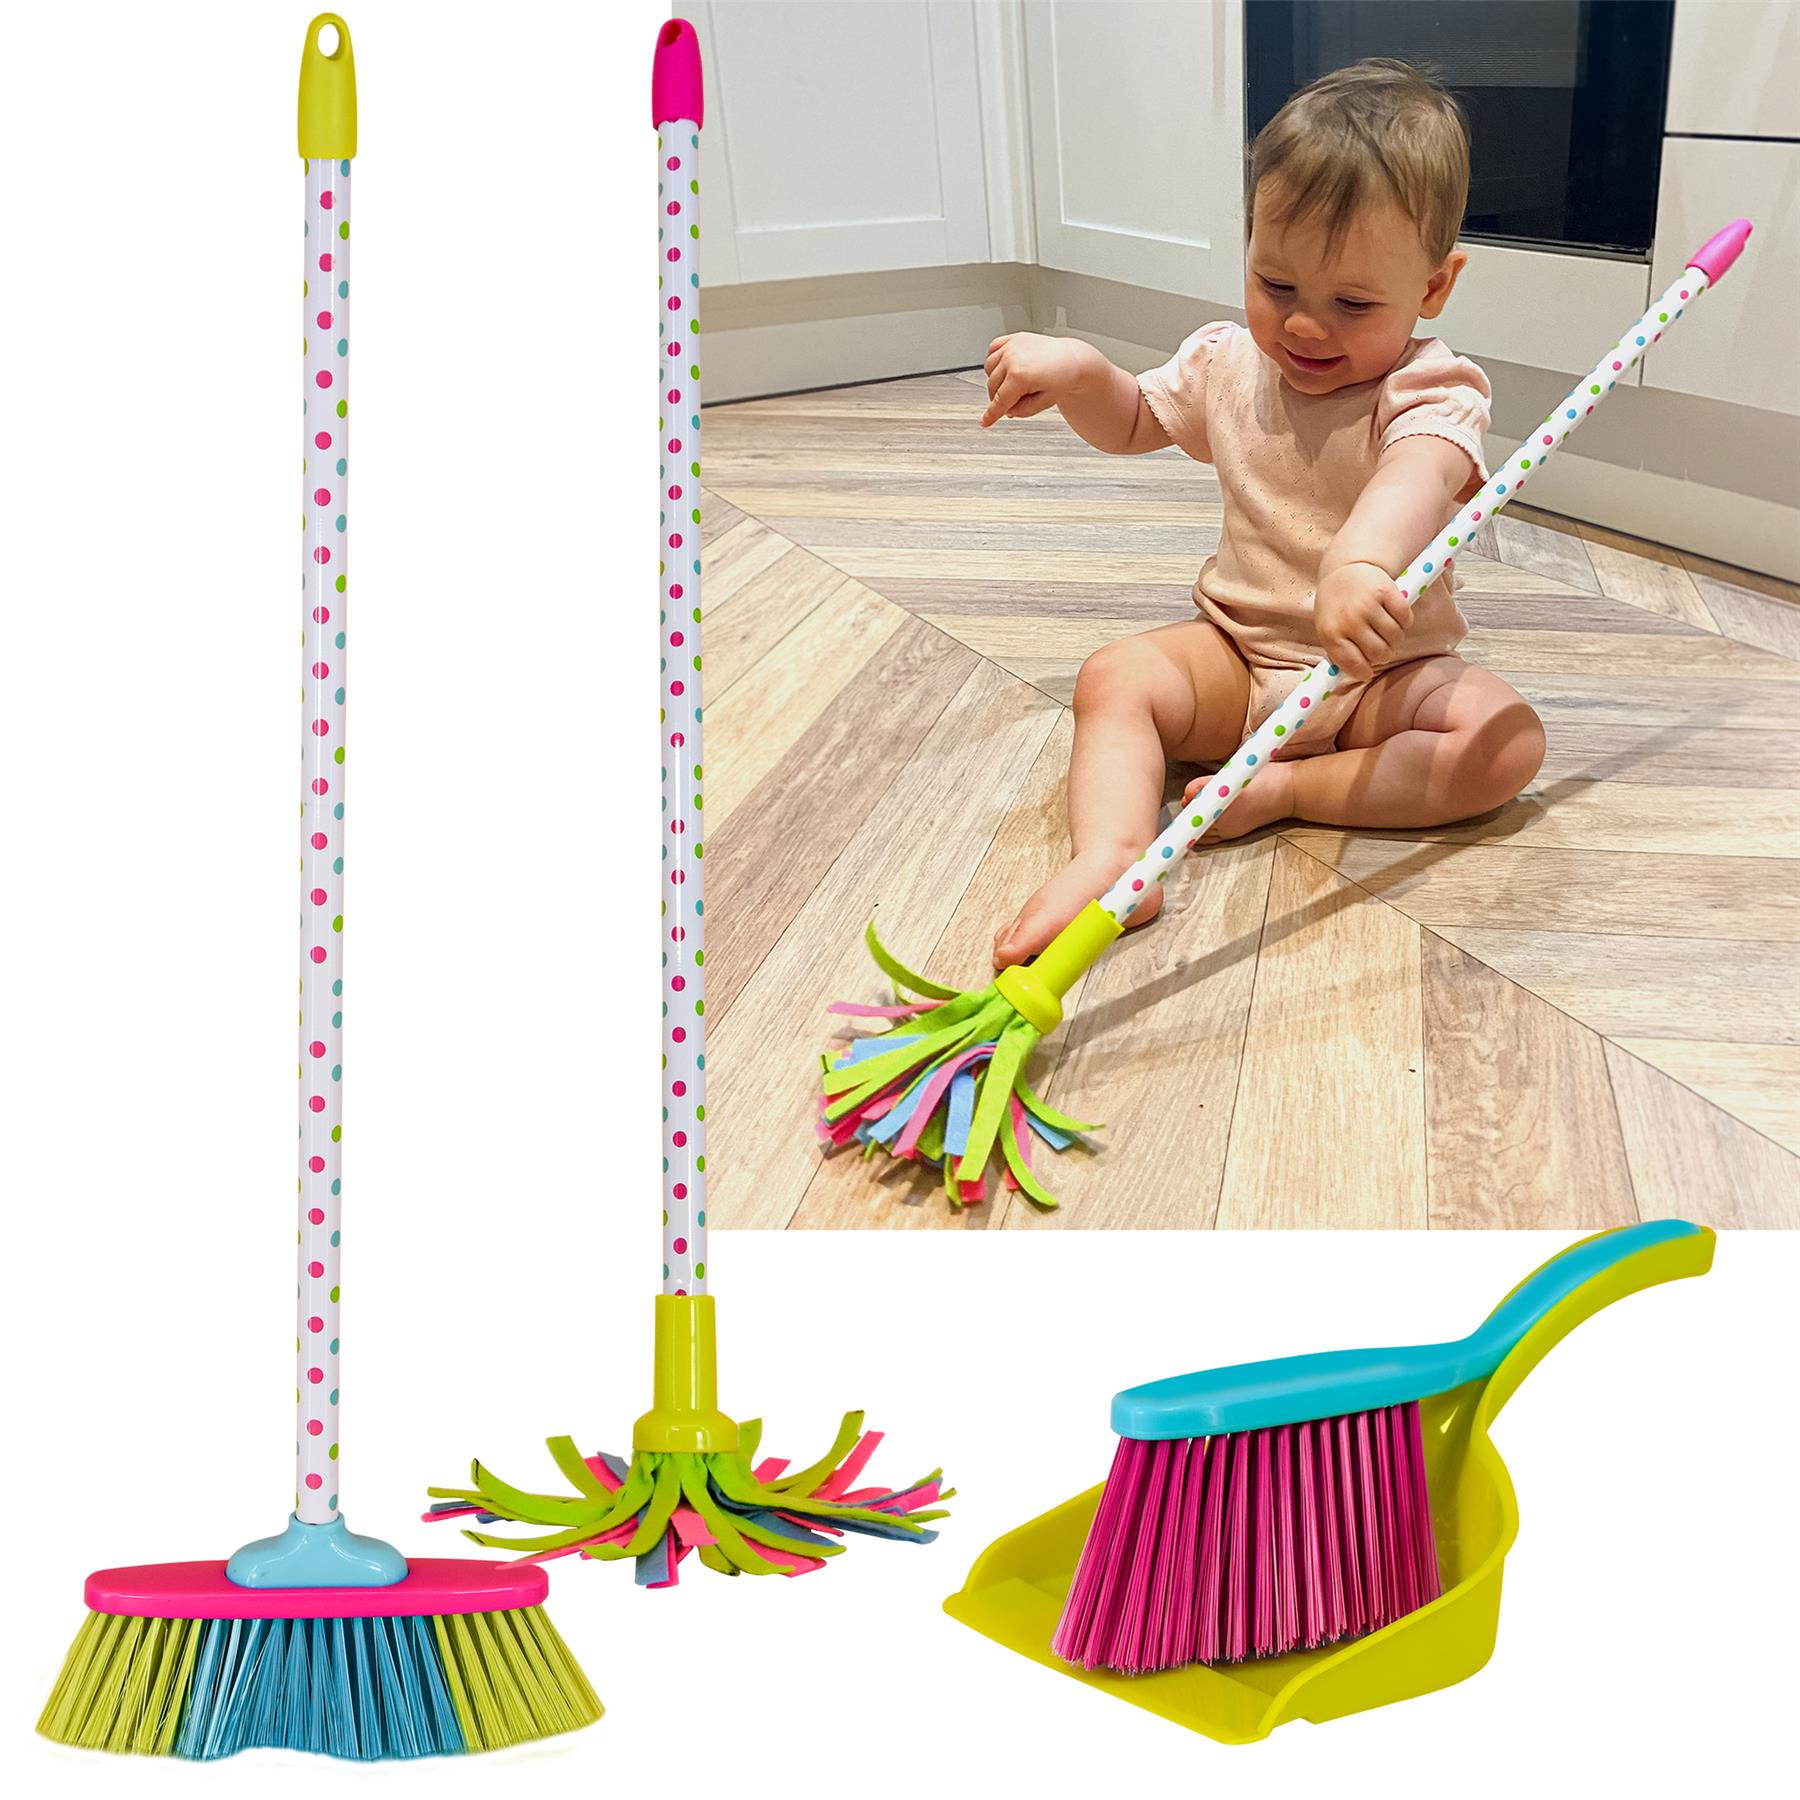 Kids Cleaning Play Set Toy by The Magic Toy Shop - The Magic Toy Shop